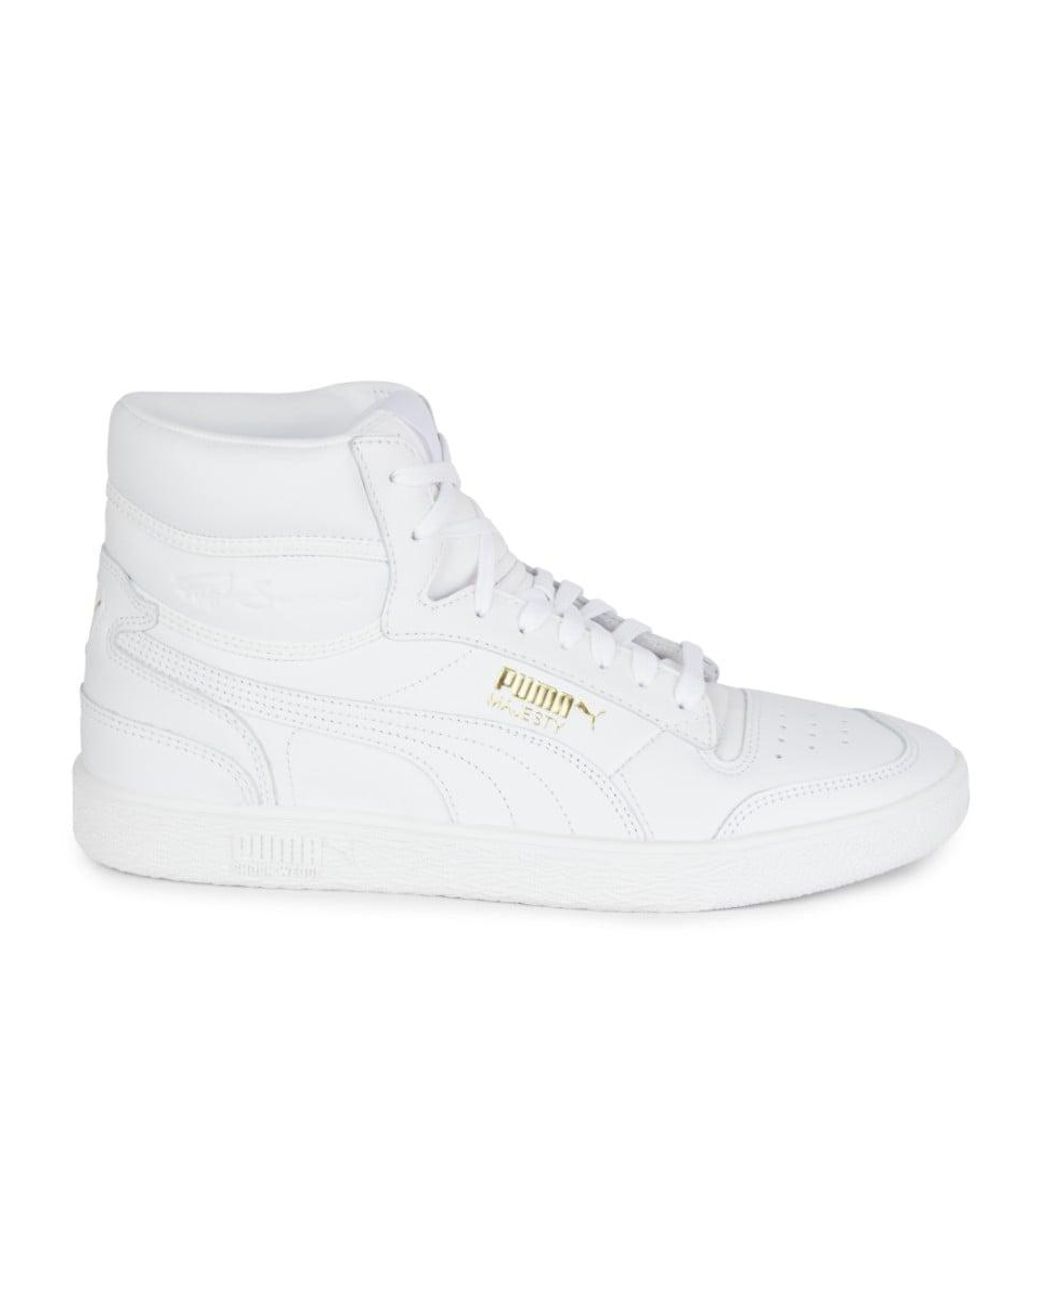 PUMA Leather Ralph Sampson White Mid Men's Sneakers for Men | Lyst